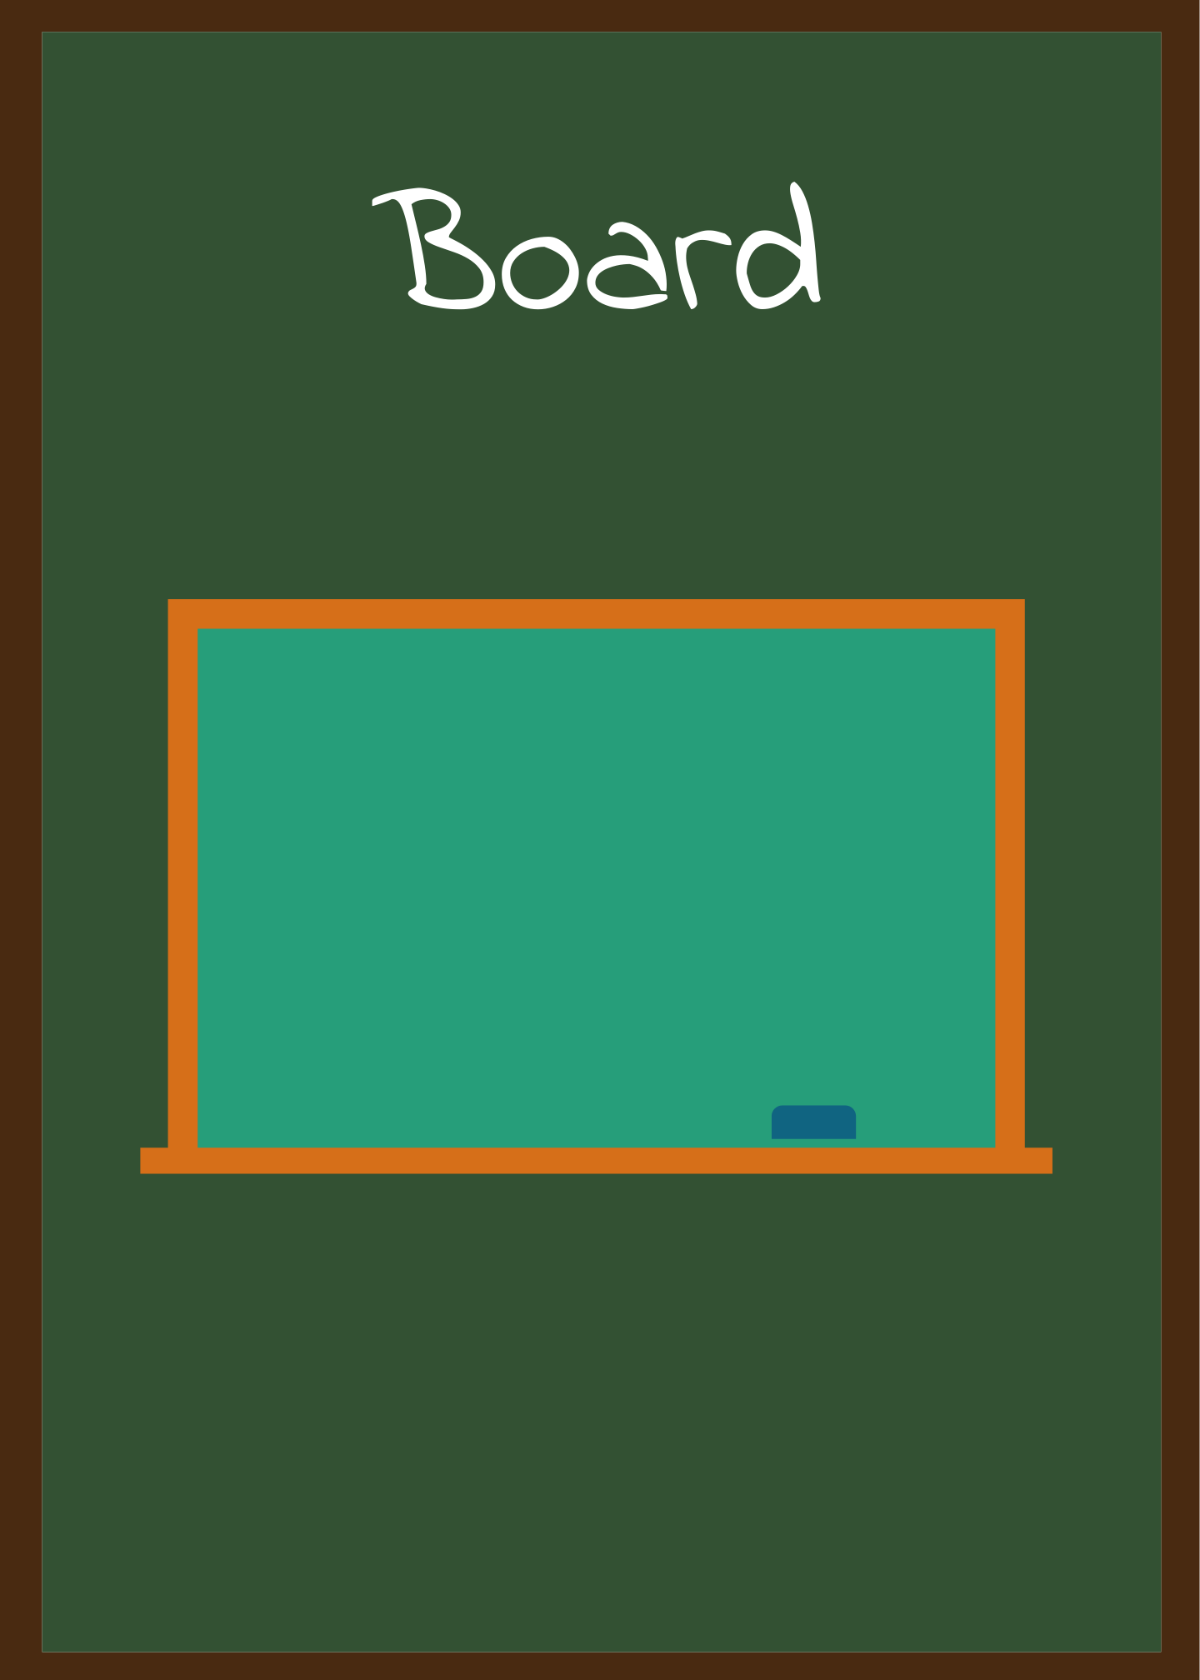 Classroom Objects Flashcards Template